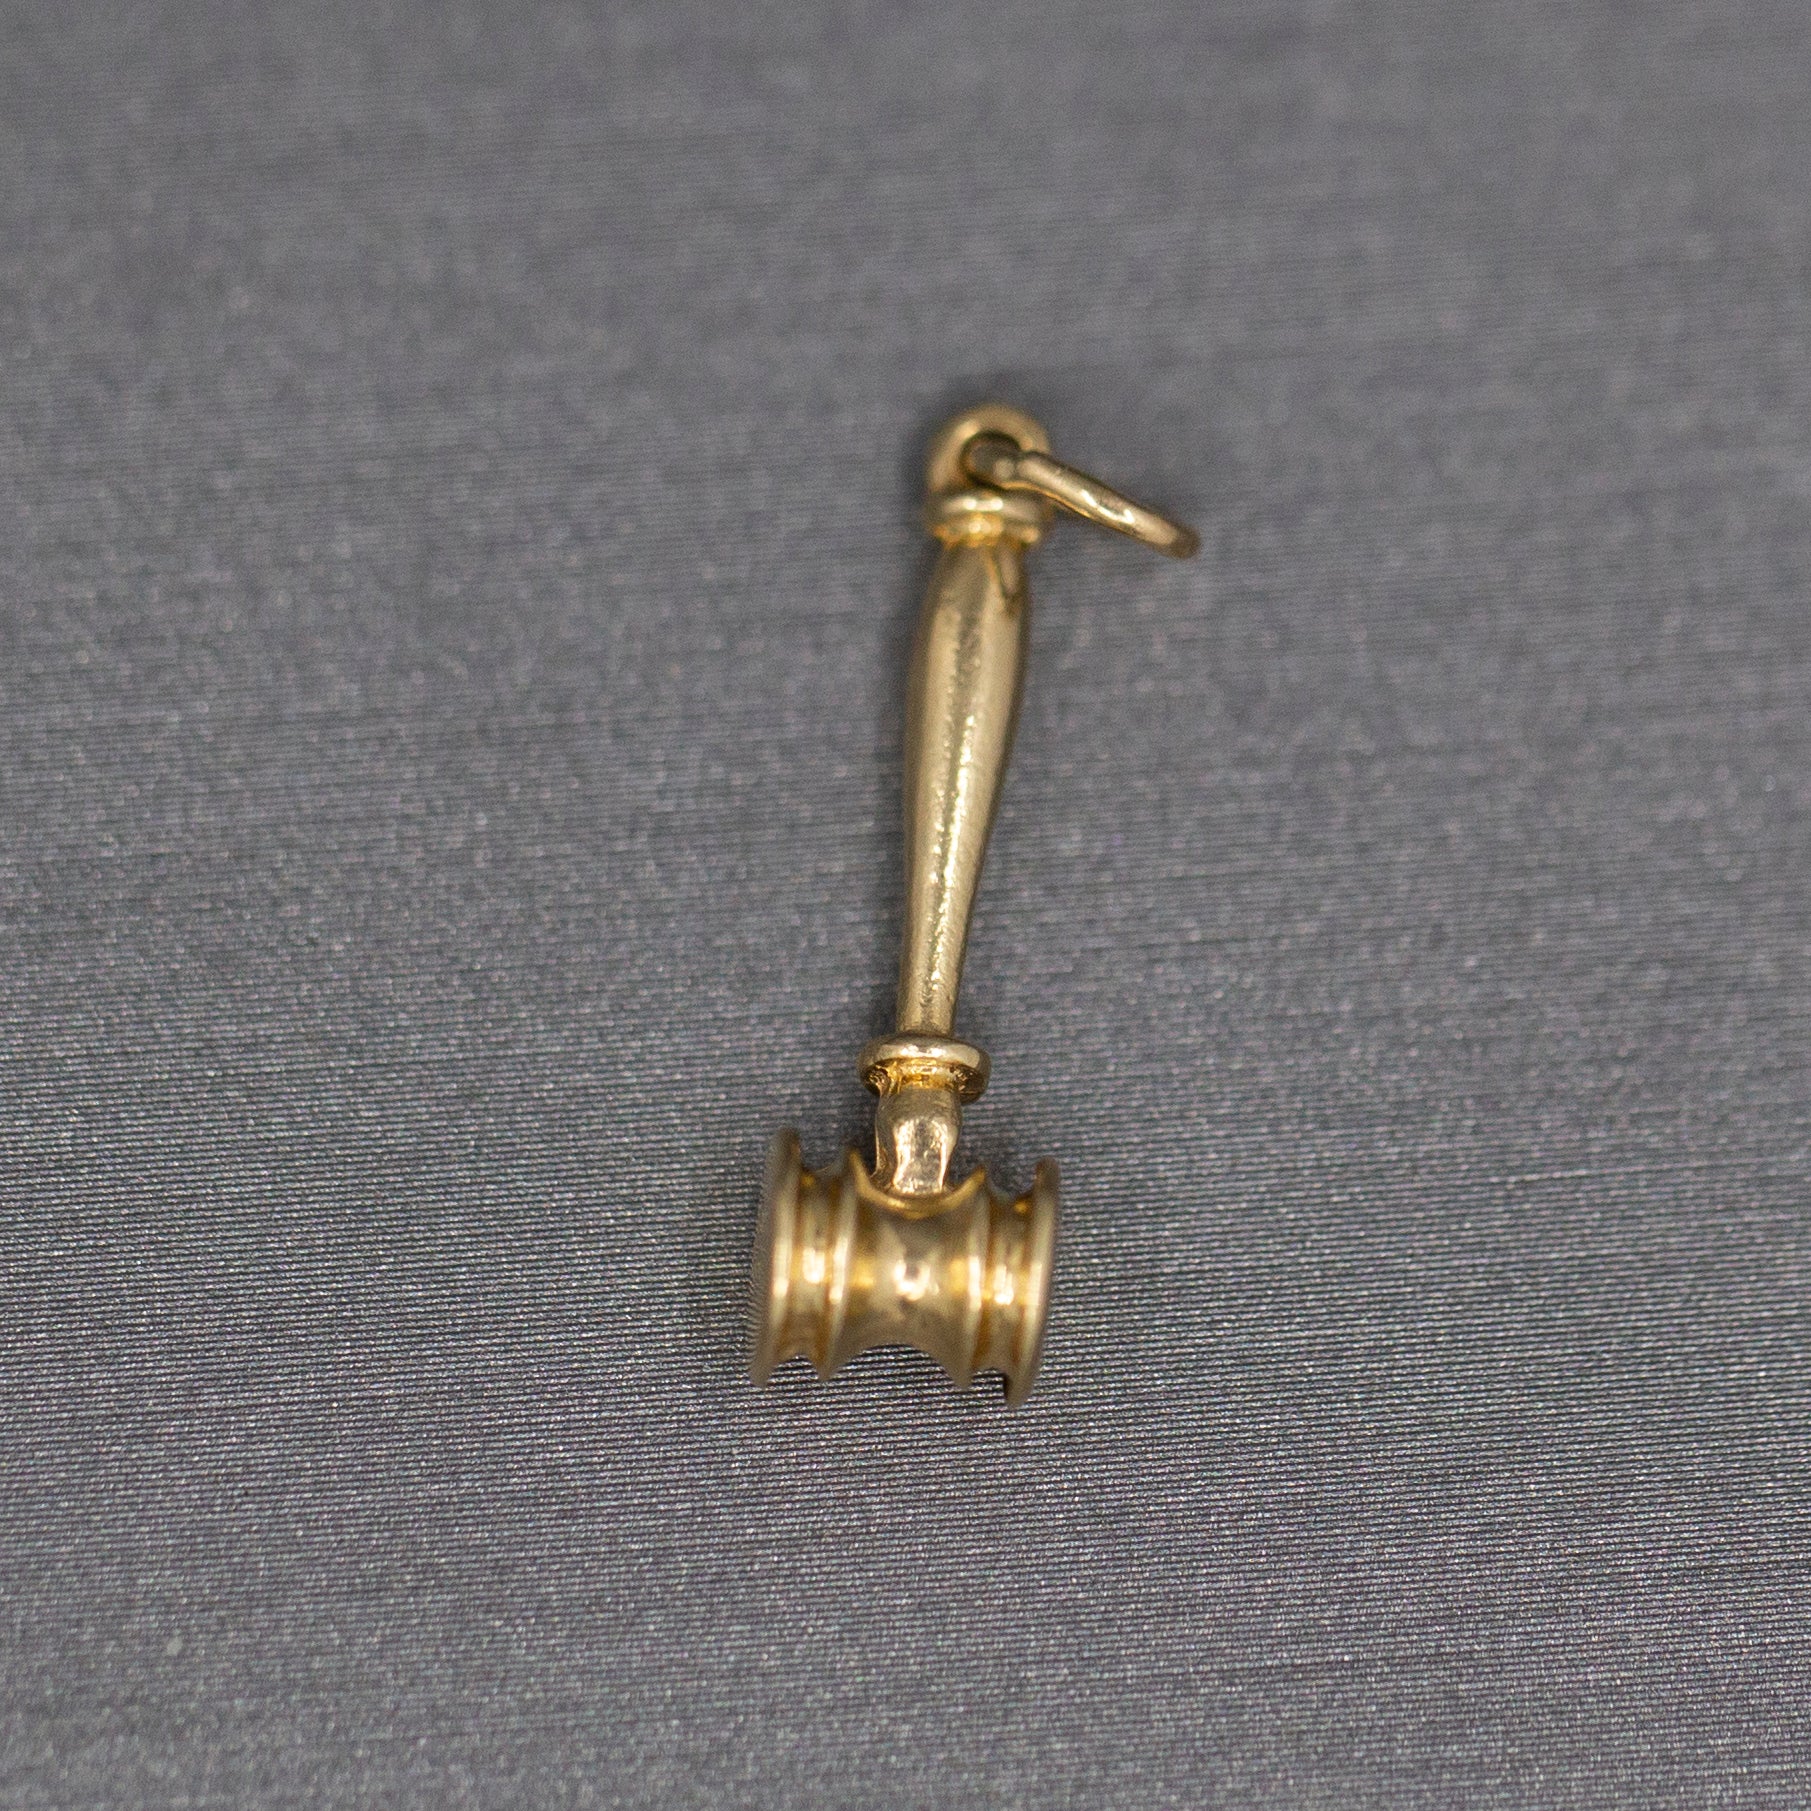 Judge's Gavel Pendant Charm in Solid 14k Yellow Gold